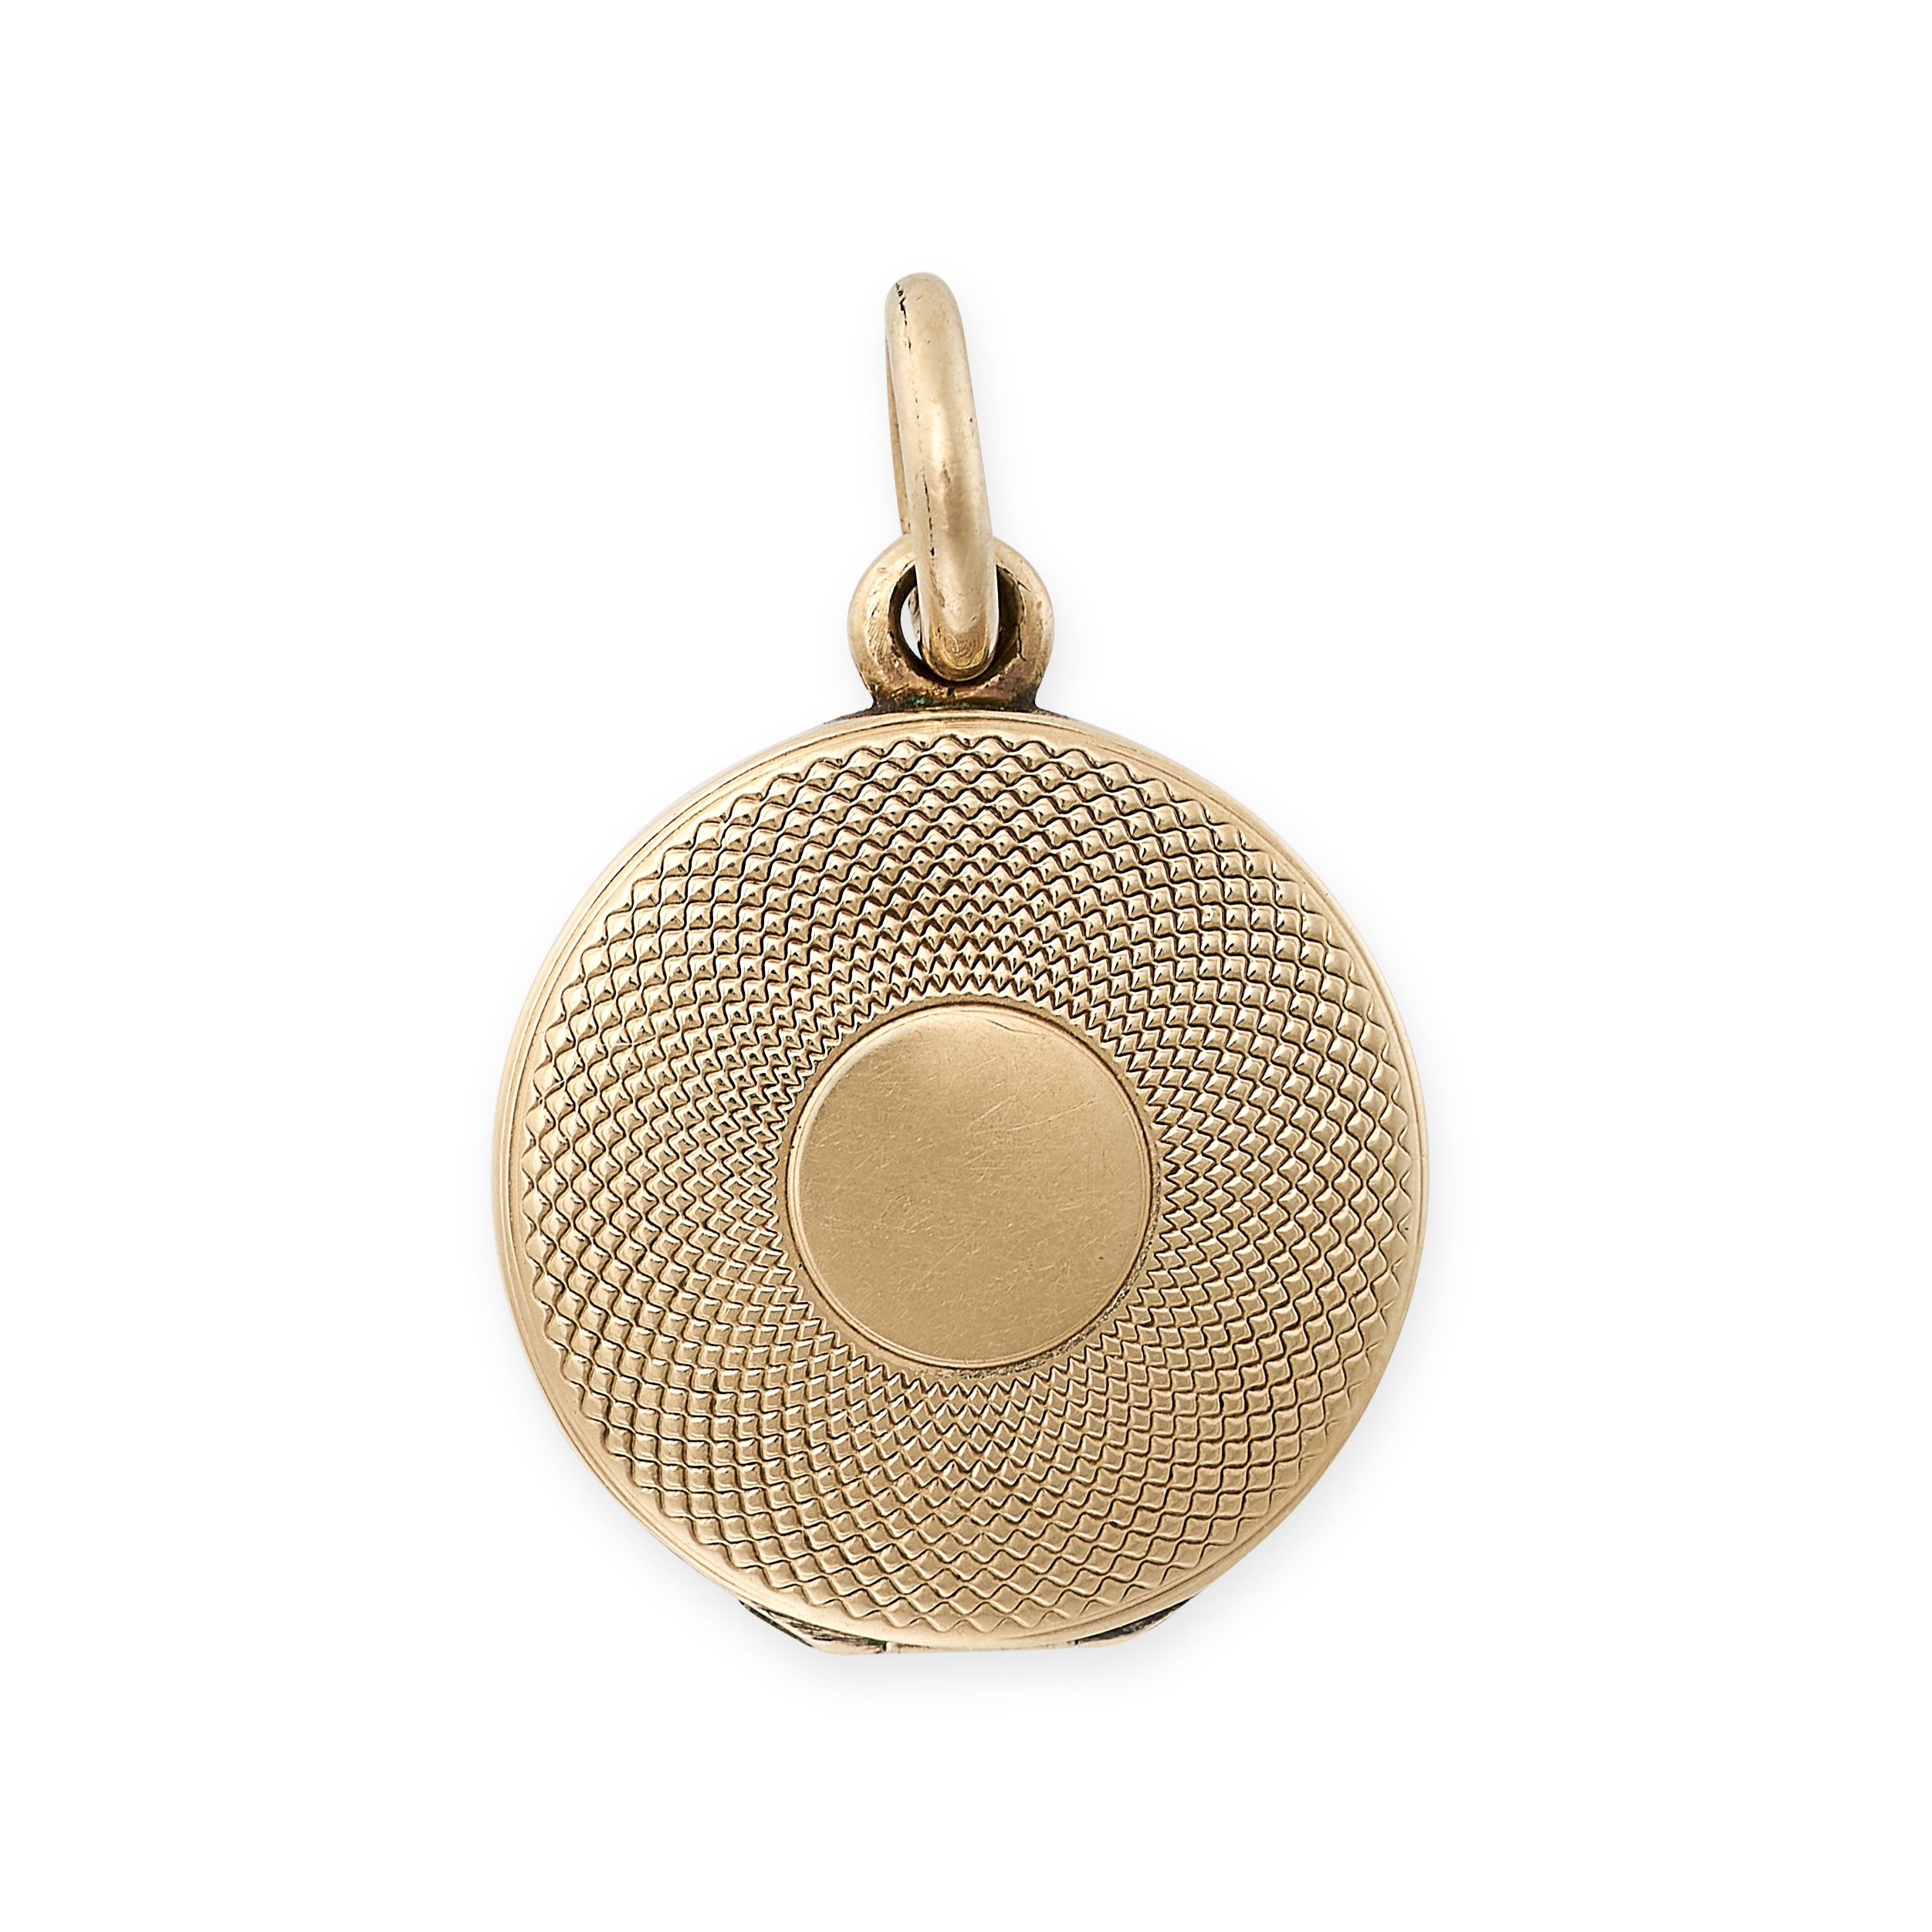 NO RESERVE - AN ANTIQUE VICTORIAN HAIRWORK MOURNING LOCKET PENDANT in yellow gold, circular shape